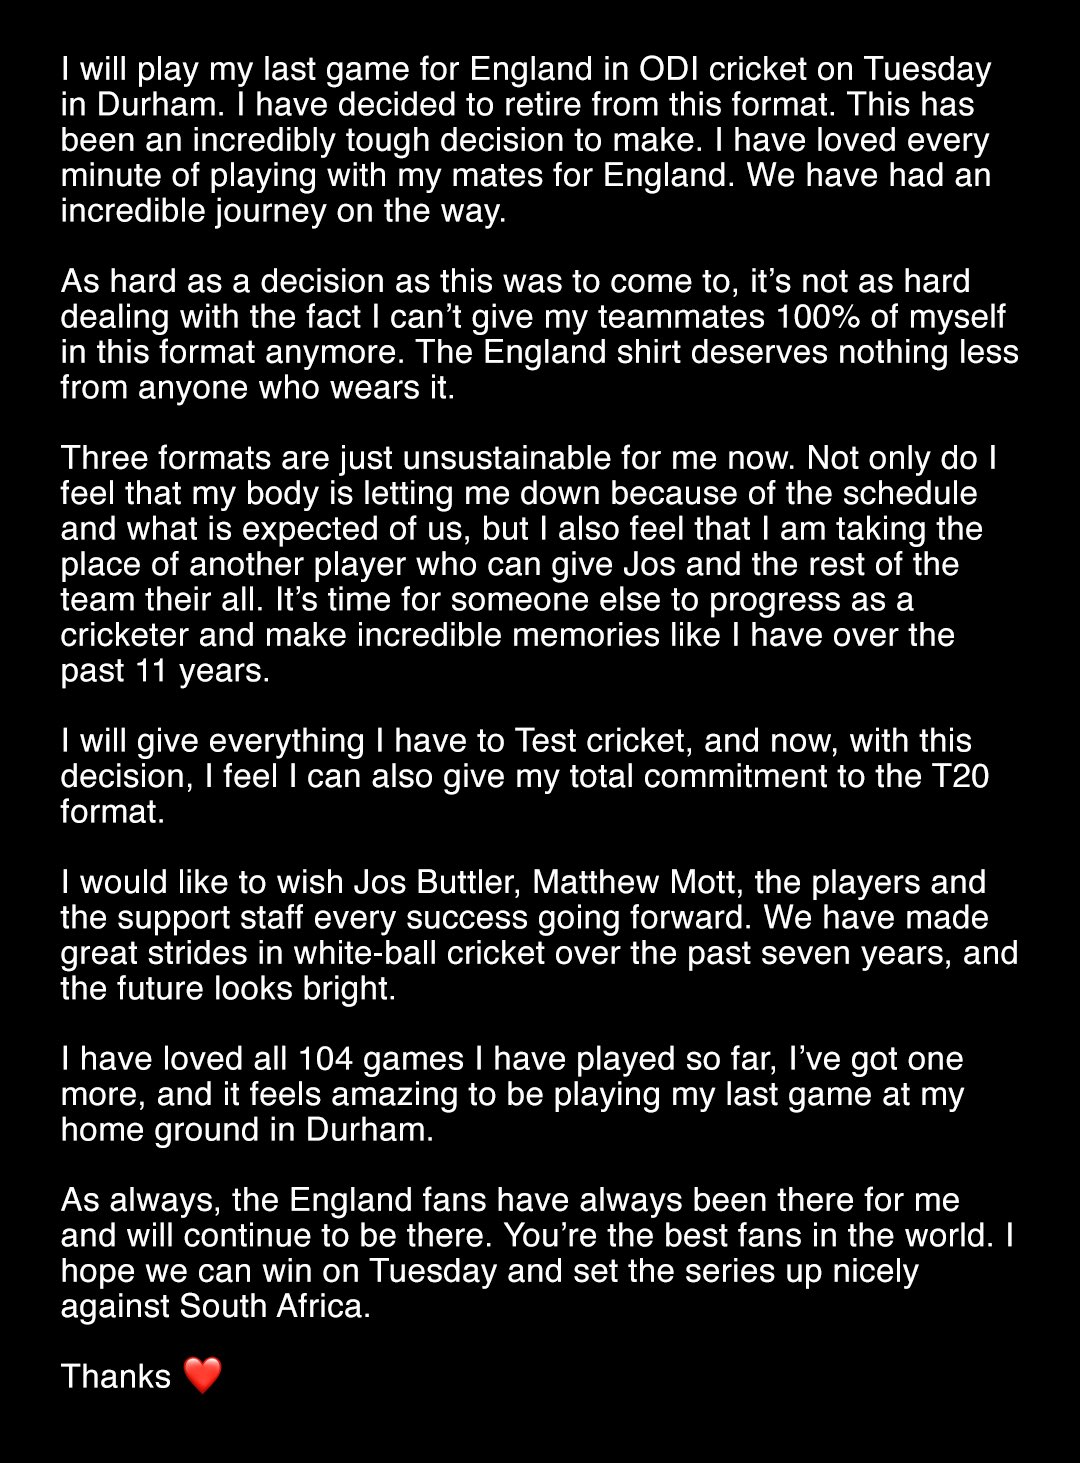 Ben stokes announced his retirement of odi posts emotional note